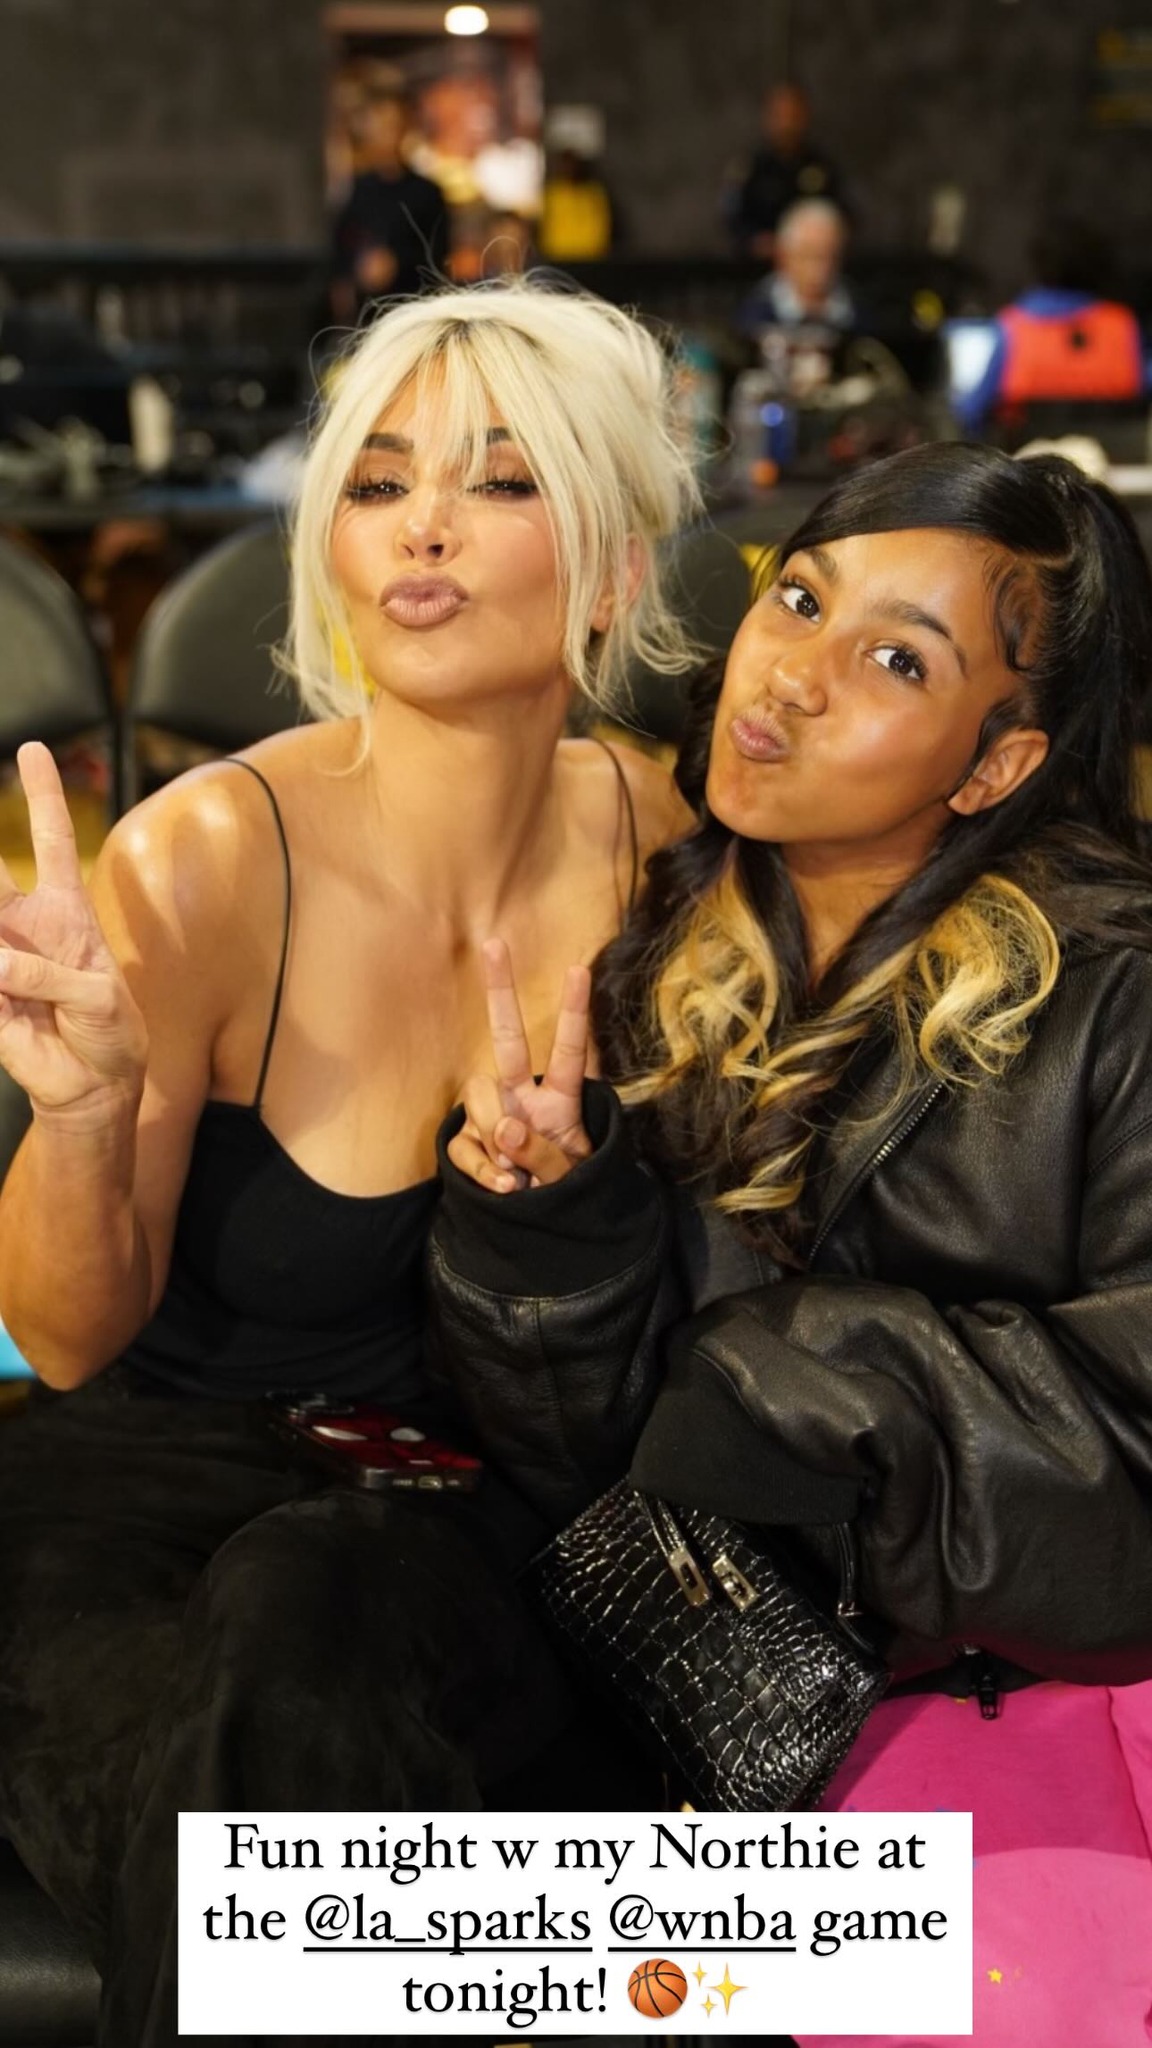 Kim sported her blonde hair and greasy skin at the game as she took a photo with her 10-year-old daughter